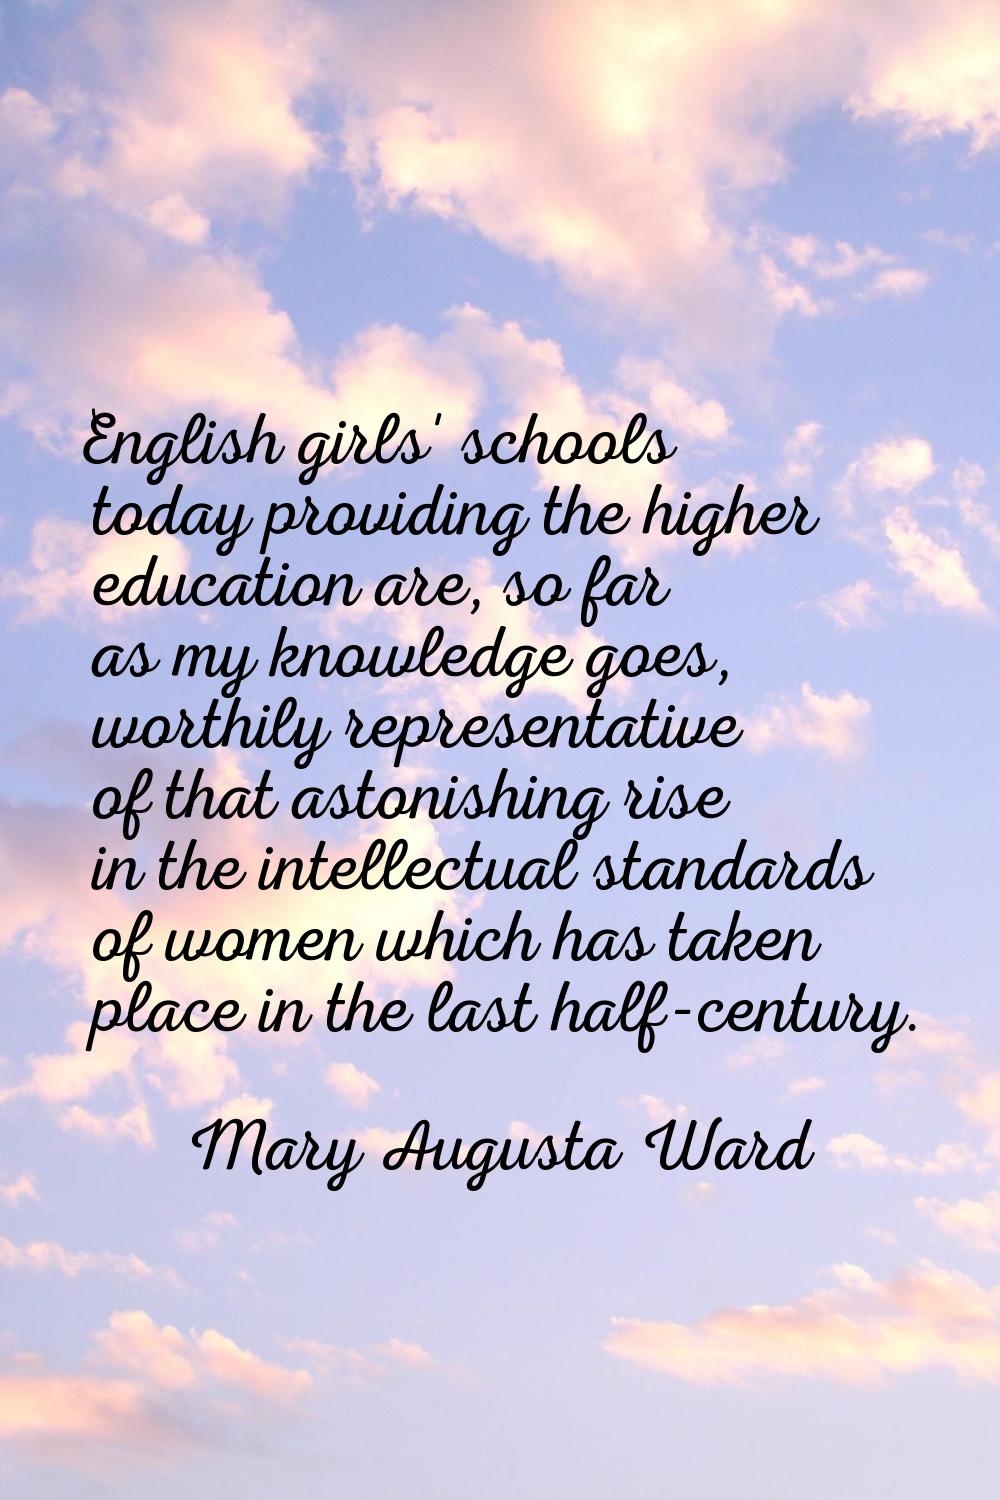 English girls' schools today providing the higher education are, so far as my knowledge goes, worth